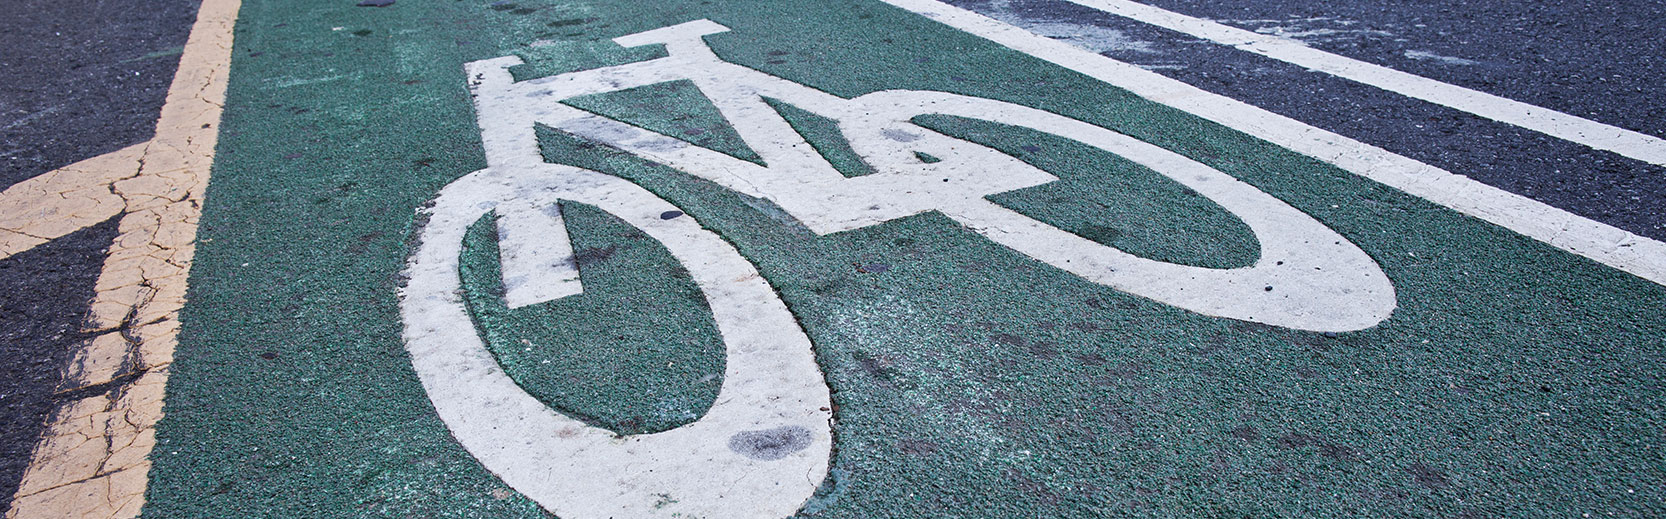 image of bicycle lane with the painted sign for bicycle